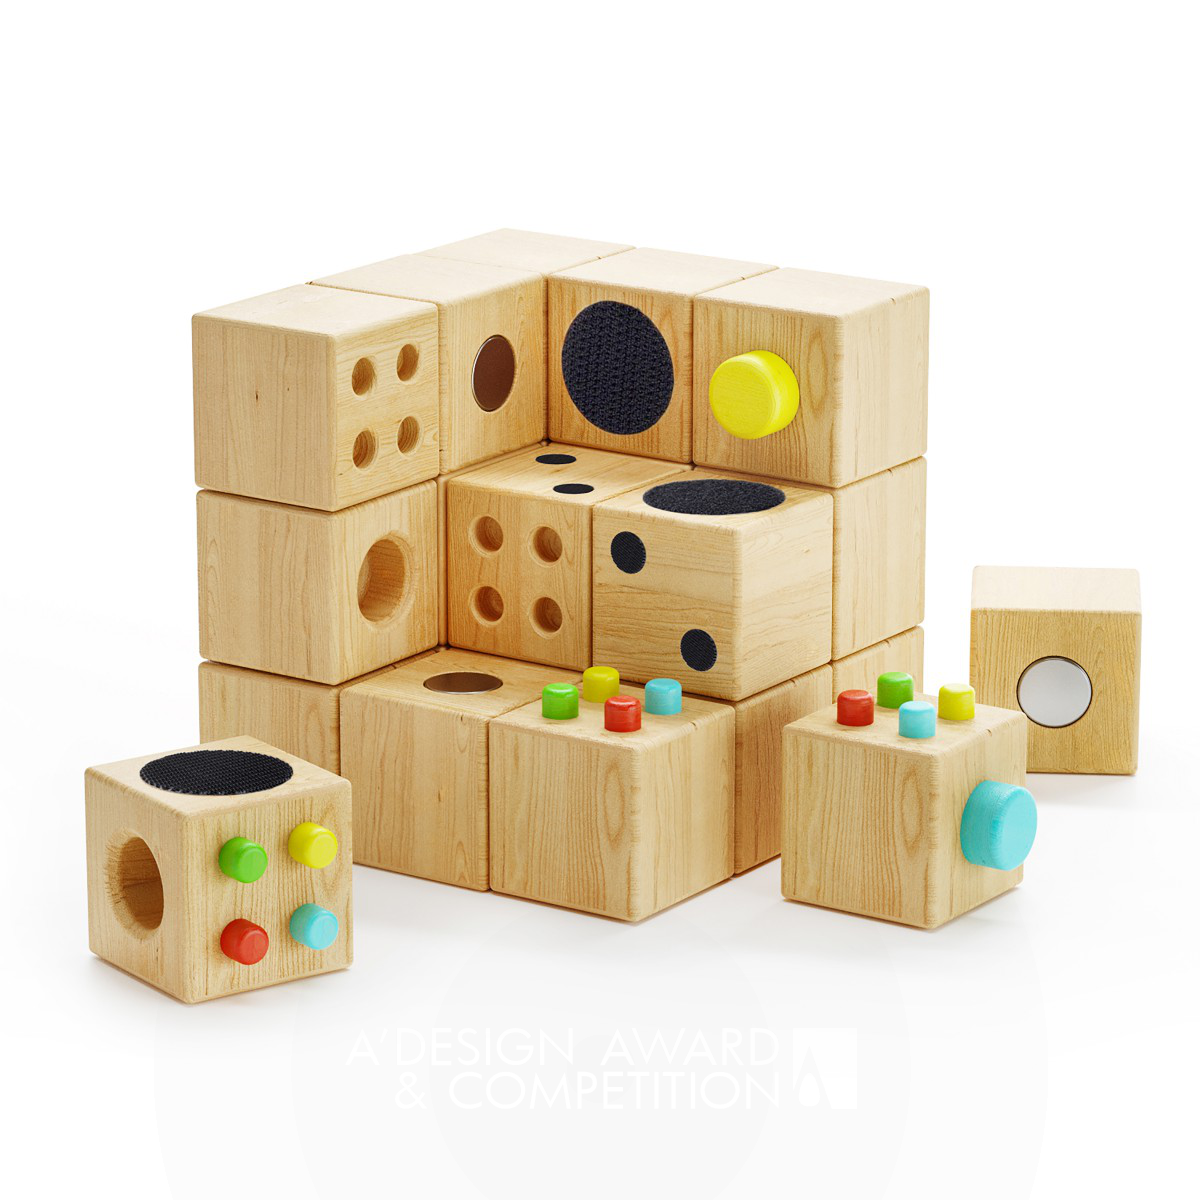 Esmail Ghadrdani wins Silver at the prestigious A' Toys, Games and Hobby Products Design Award with Cubecor Wood Toy.